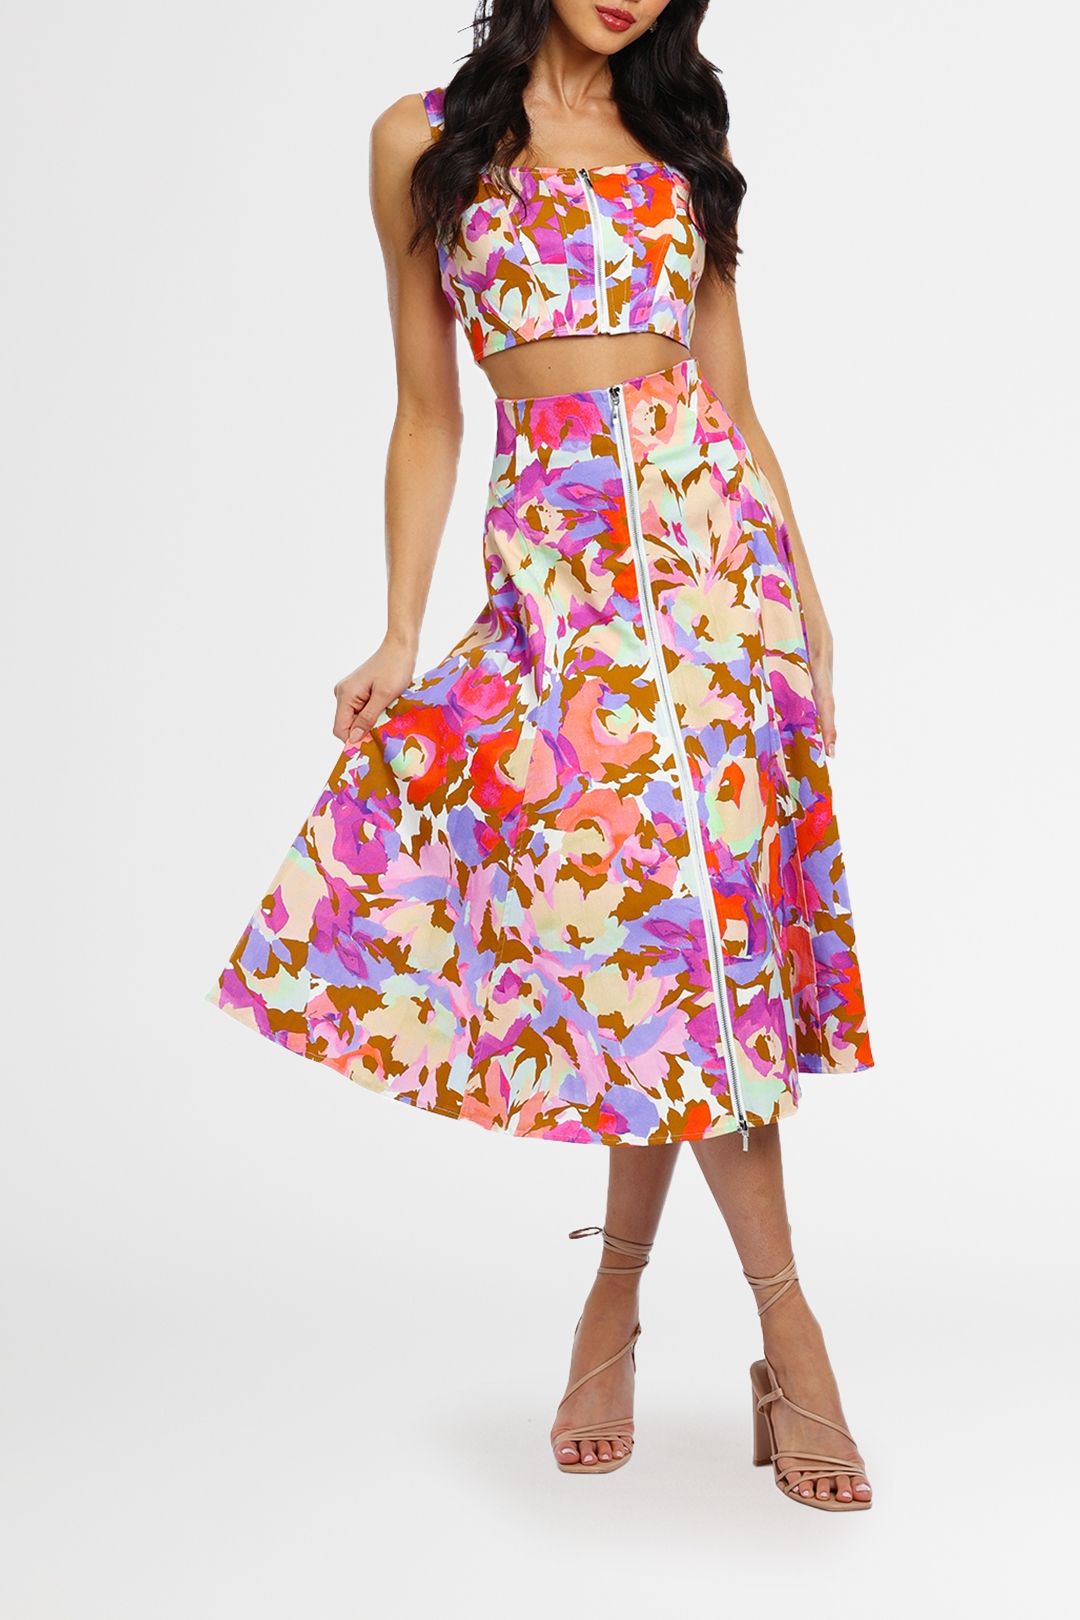 Nicholas Dawn Top and Dasia Skirt Set Abstract Floral